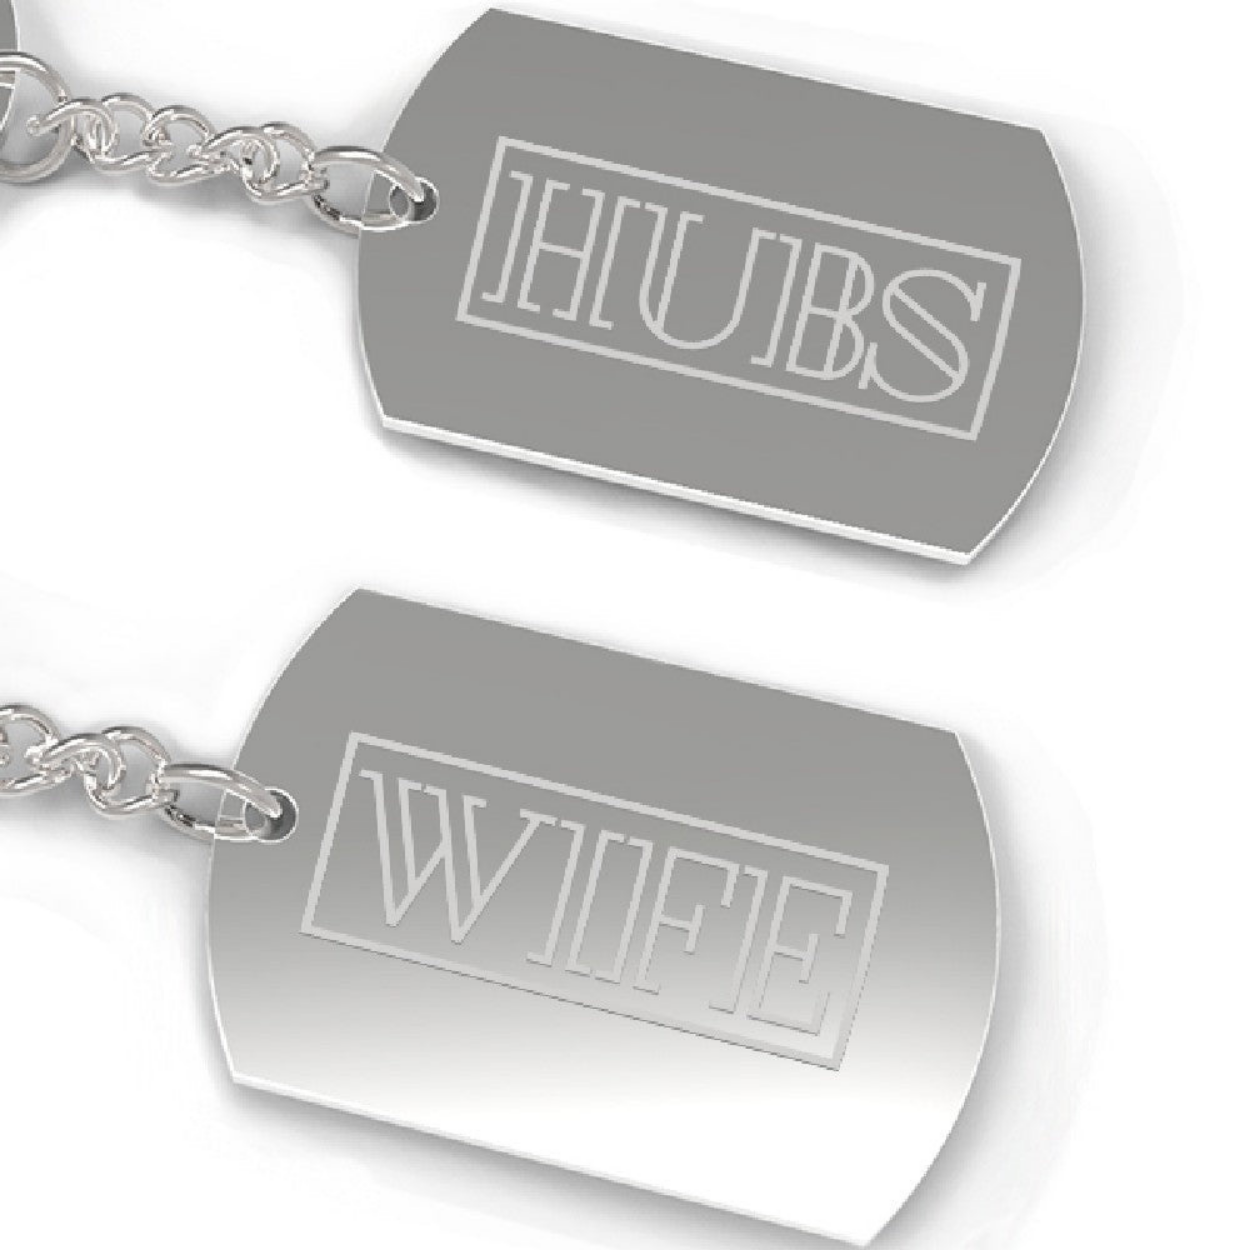 Hubs And Wife Matching Couple Silver Key Chains